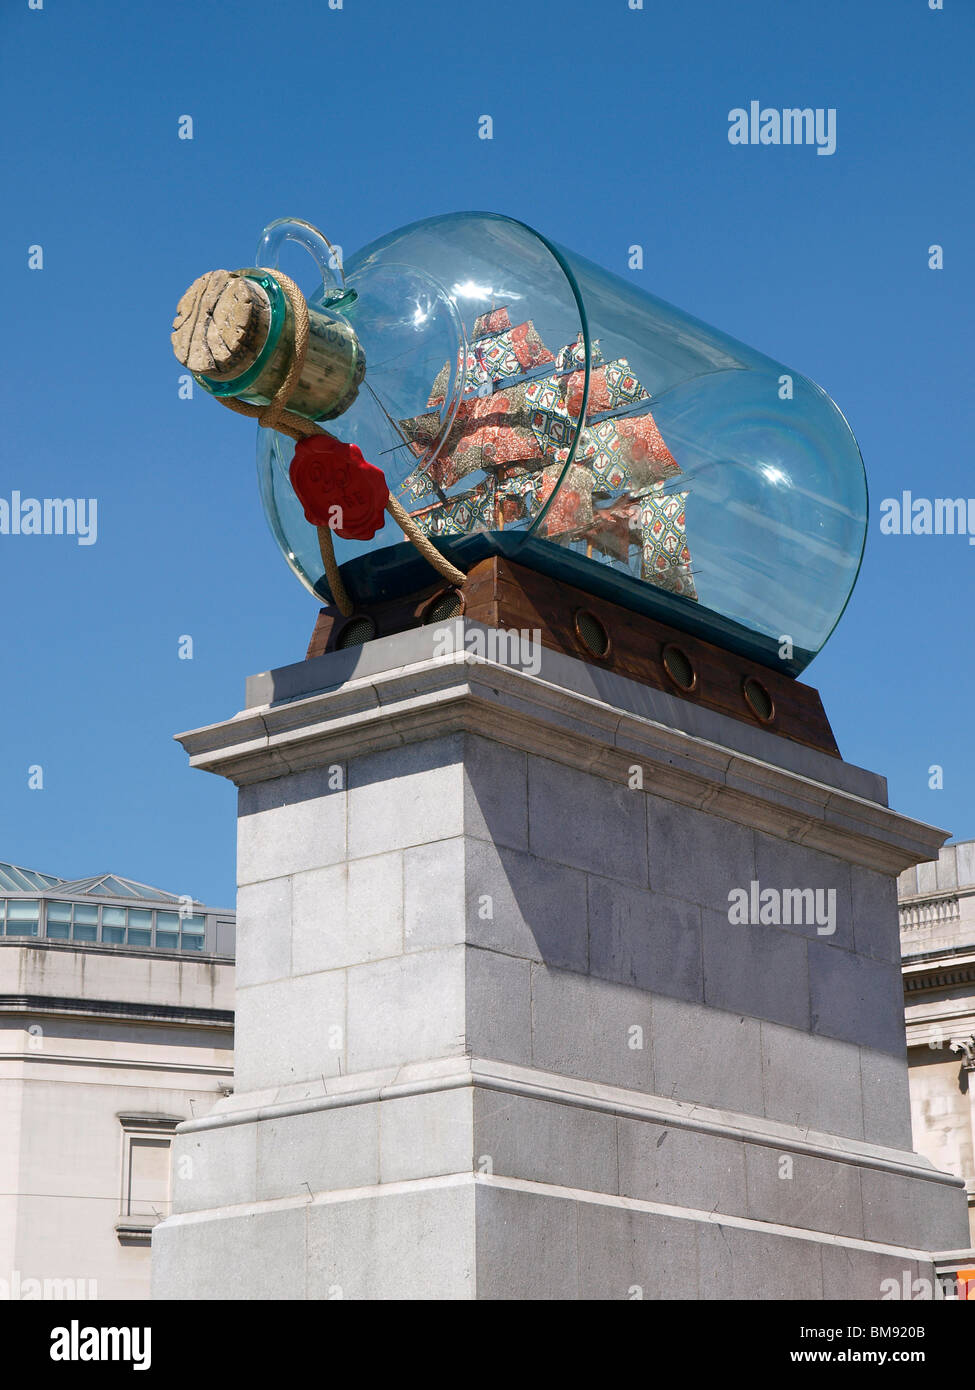 The sculpture of HMS Victory by Yinka Shonibare on the Fourth Plinth in Trafalgar Square was unveiled today 24th May 2010. Stock Photo